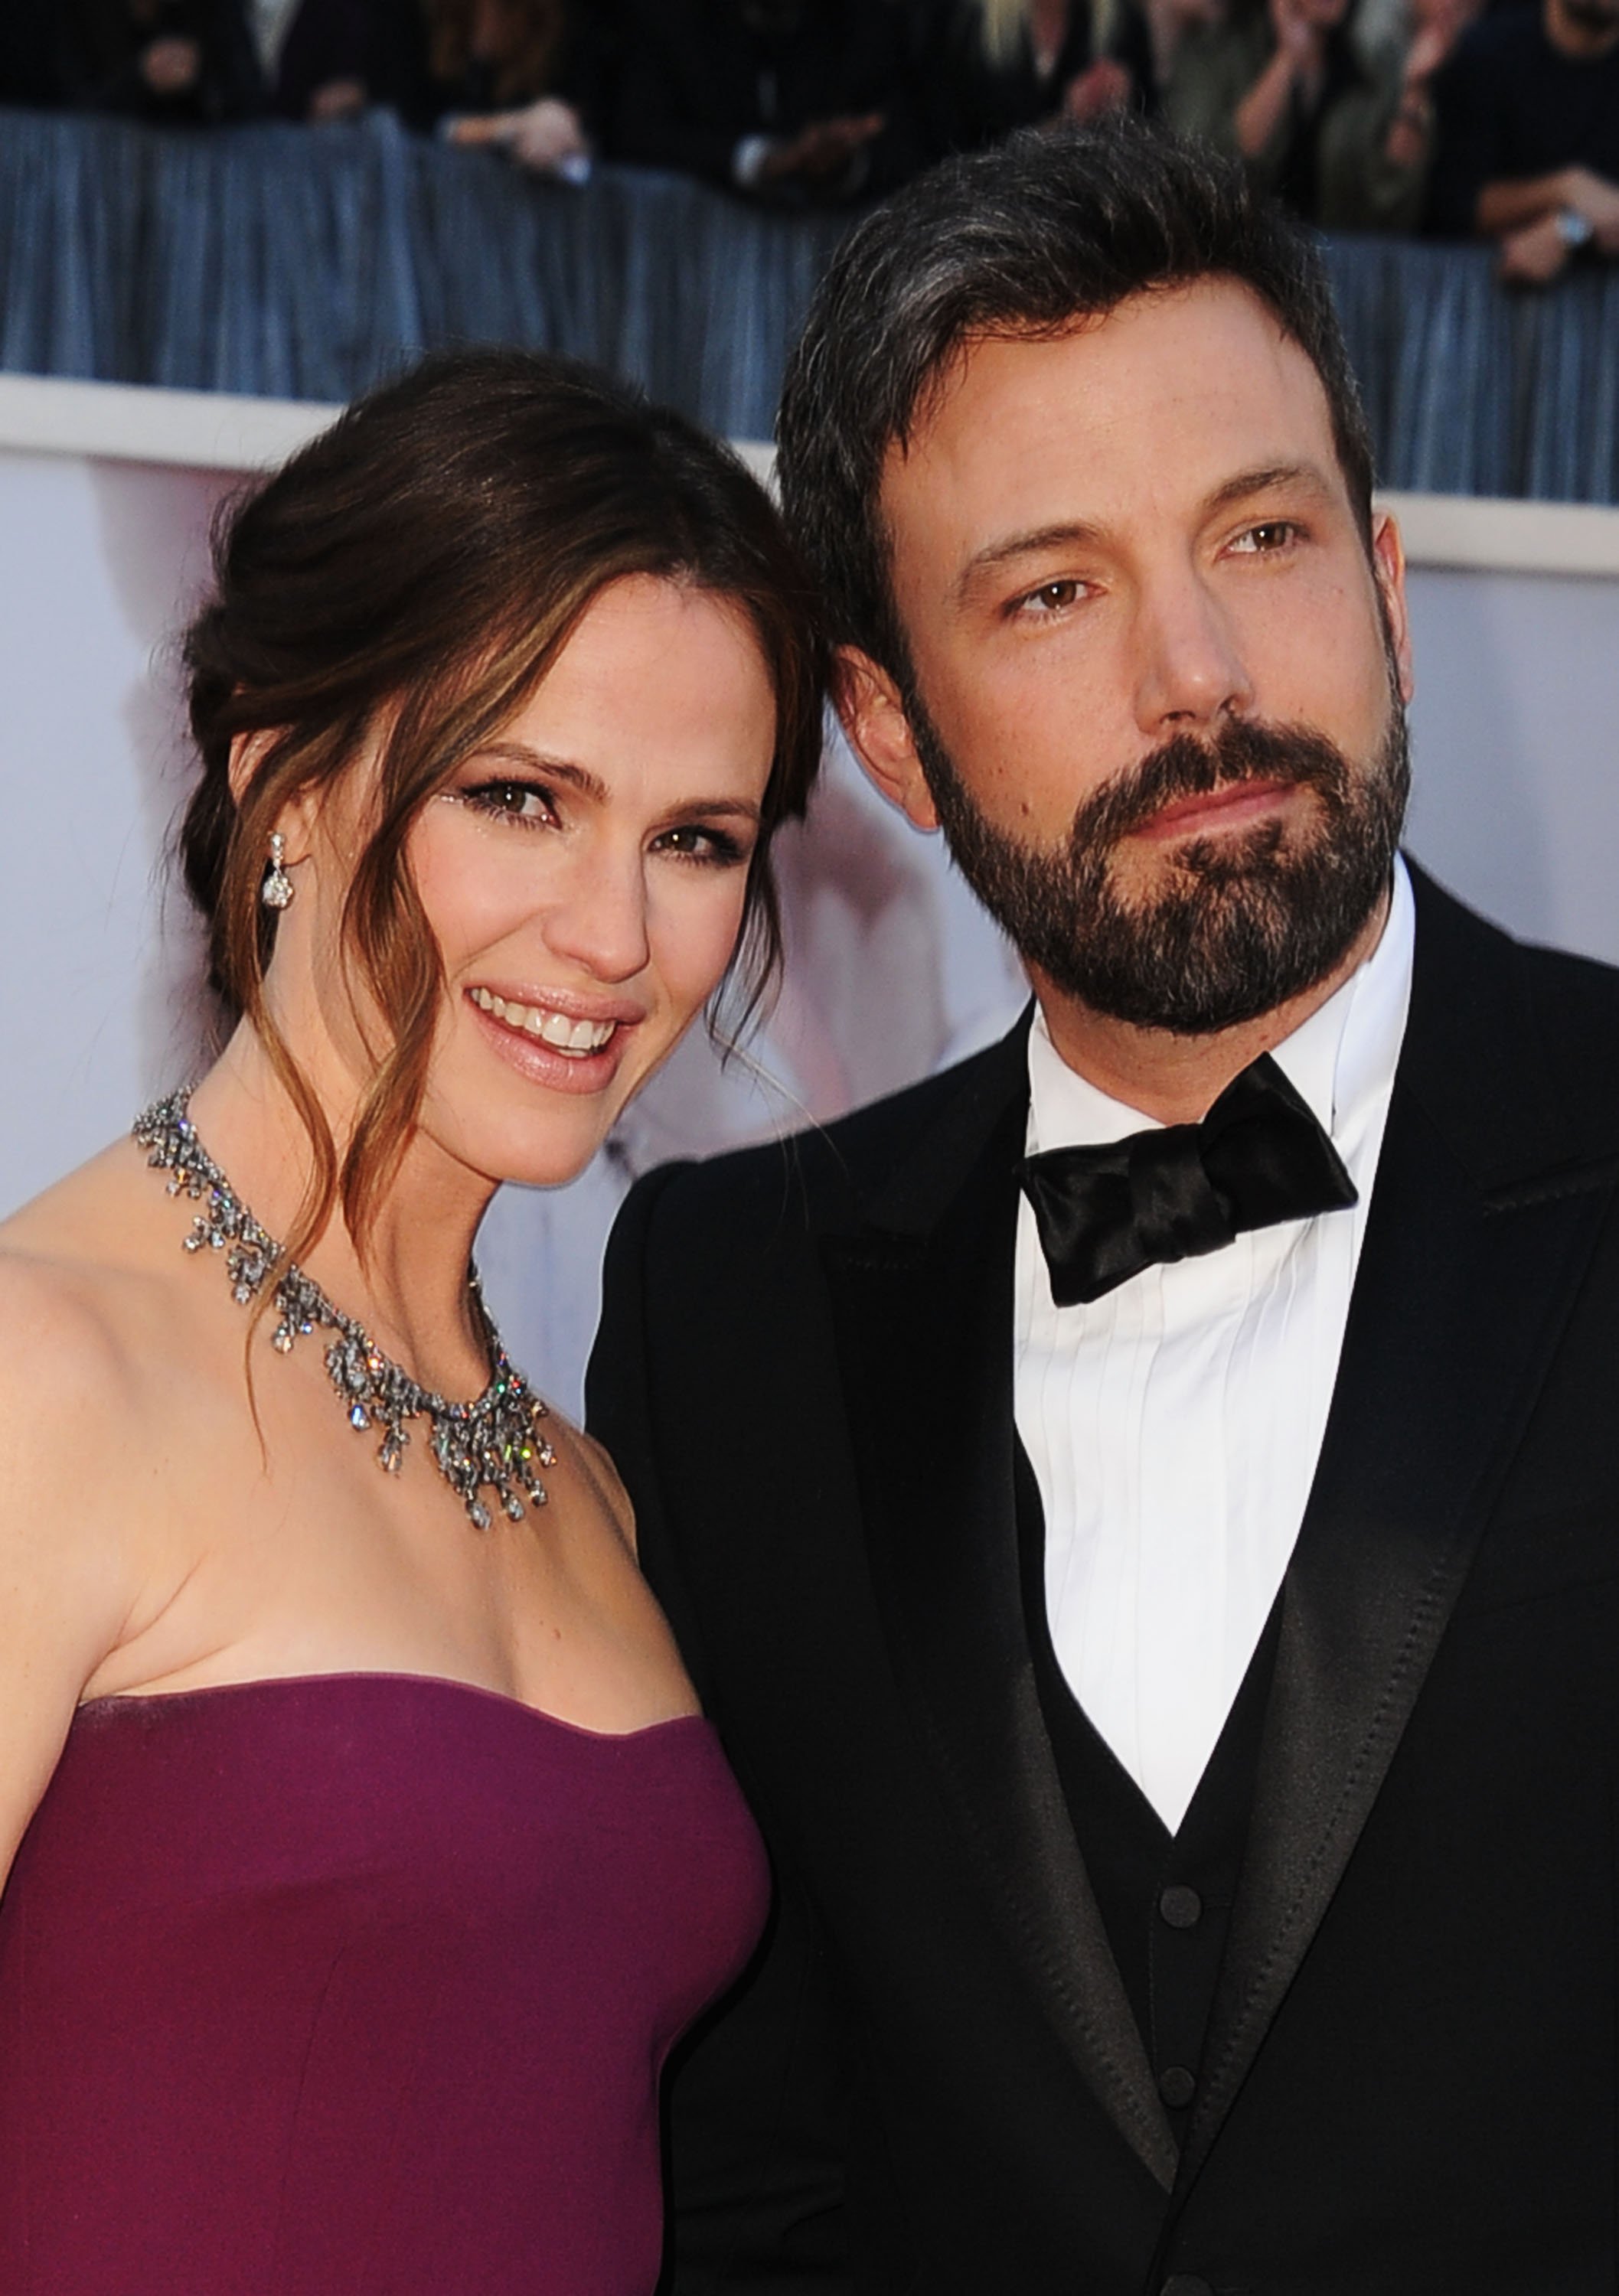 Jennifer Garner and Ben Affleck at the Oscars on February 24, 2013, in Hollywood, California. | Source: Steve Granitz/WireImage/Getty Images